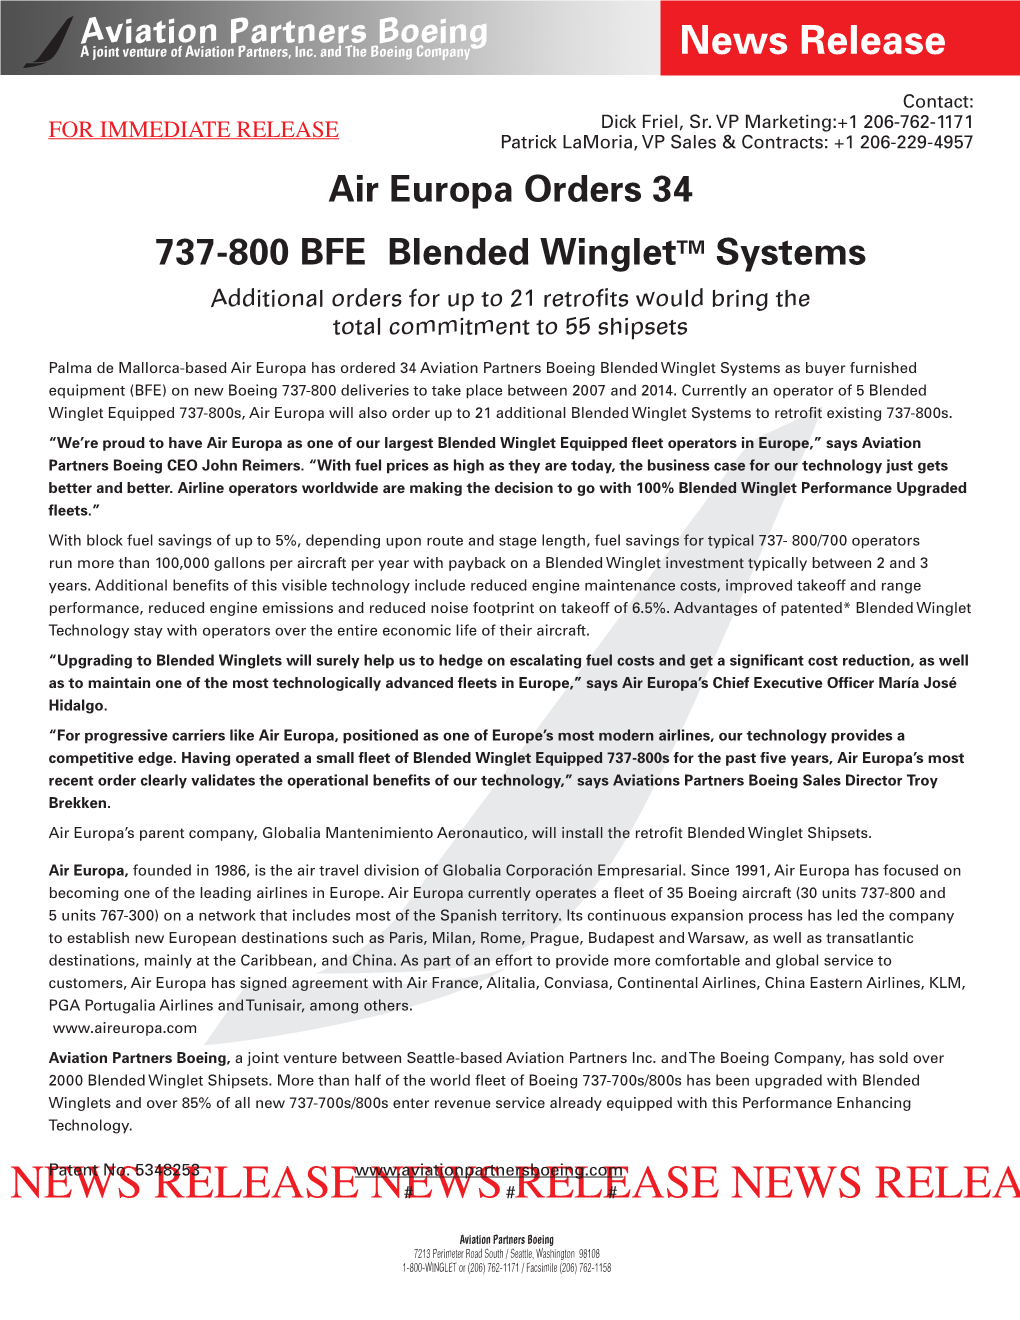 Air Europa Orders 34 737-800 BFE Blended Winglettm Systems Additional Orders for up to 21 Retrofits Would Bring the Total Commitment to 55 Shipsets